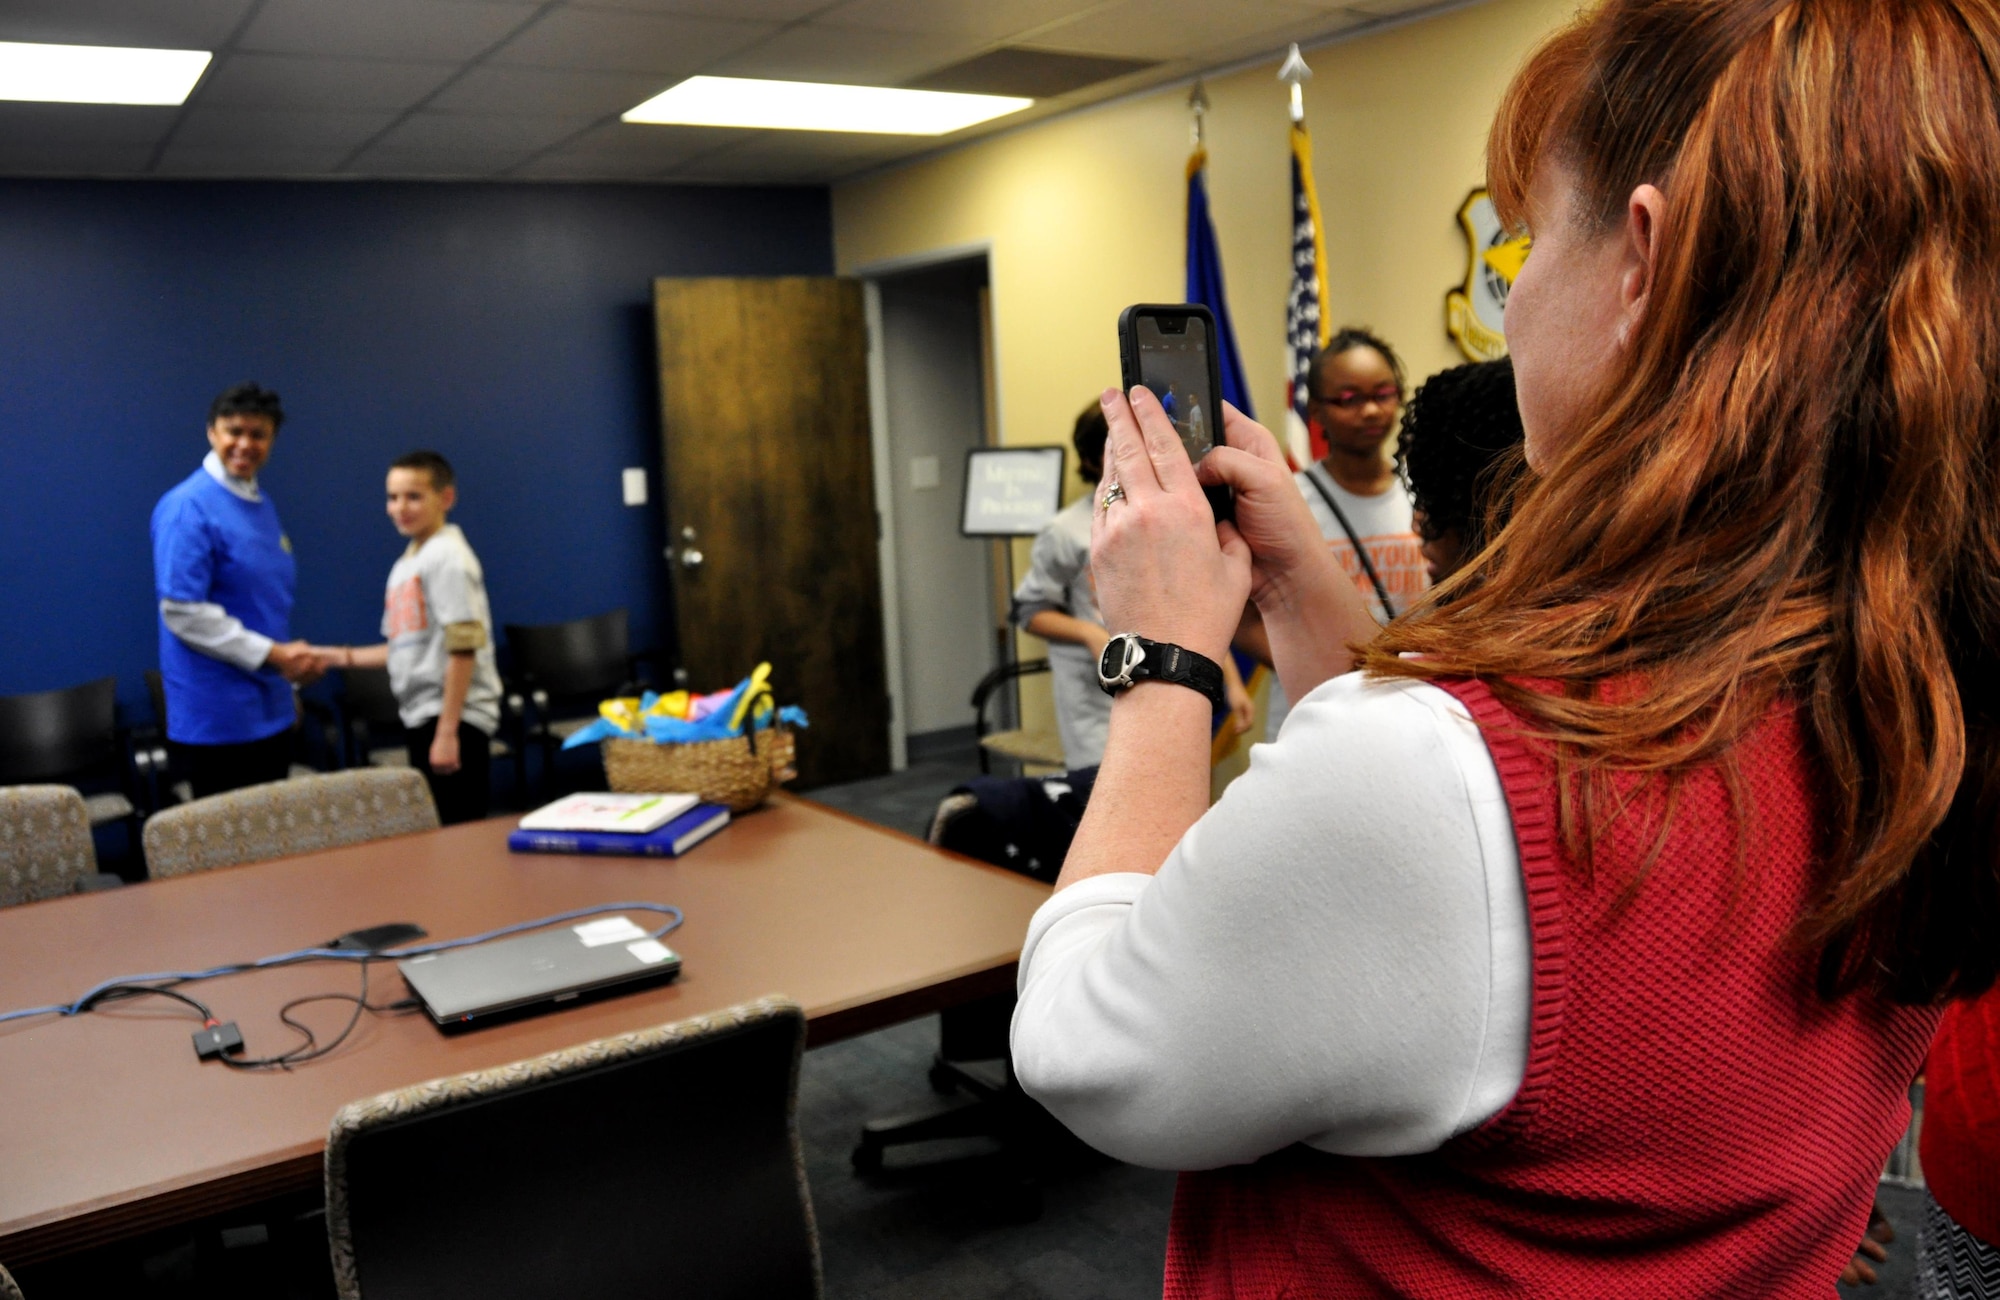 Tammy Moyse, a parent of a Bright Star Elementary student, takes a photo of her son Dalton with Maj. Gen. Stayce Harris, 22nd Air Force commander, at the 22nd AF headquarters at Dobbins Air Reserve Base, Ga., Feb. 7, 2015. Ten students from Bright Star visited the installation to interview Harris for Black History month. (U.S. Air Force photo/Senior Airman Daniel Phelps)